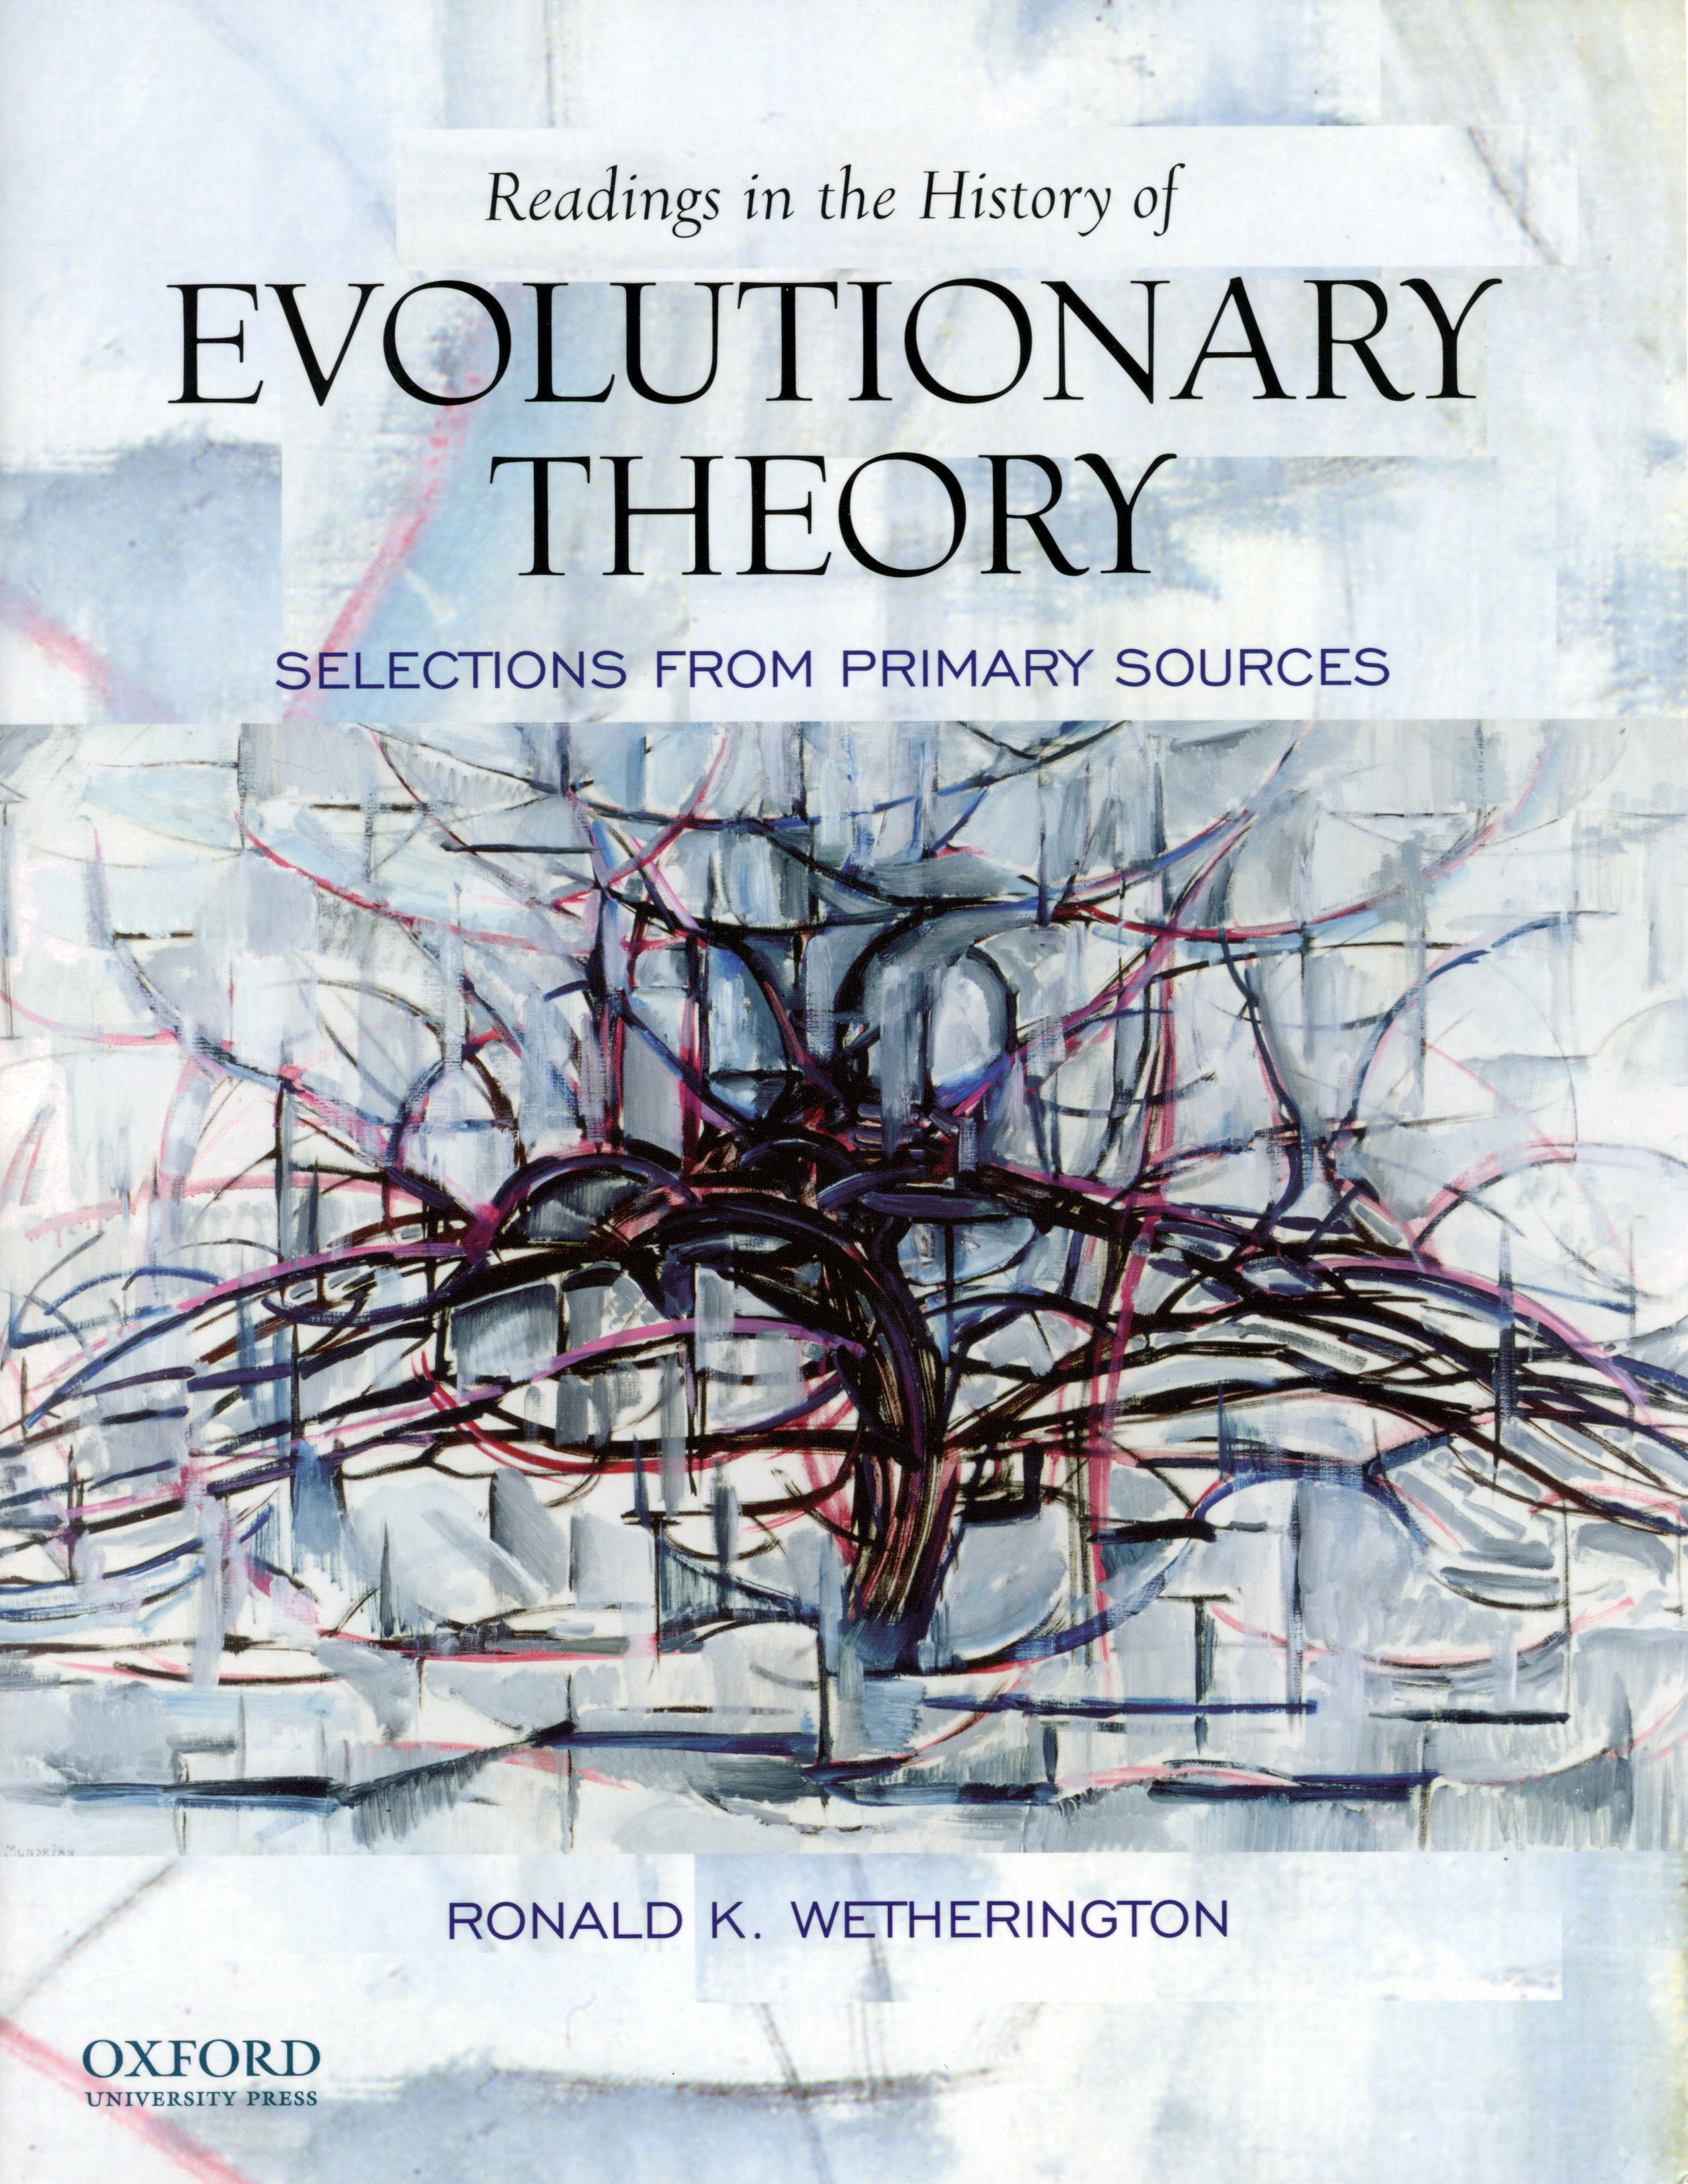 Readings in the History of Evolutionary Theory by Ronald K. Wetherington